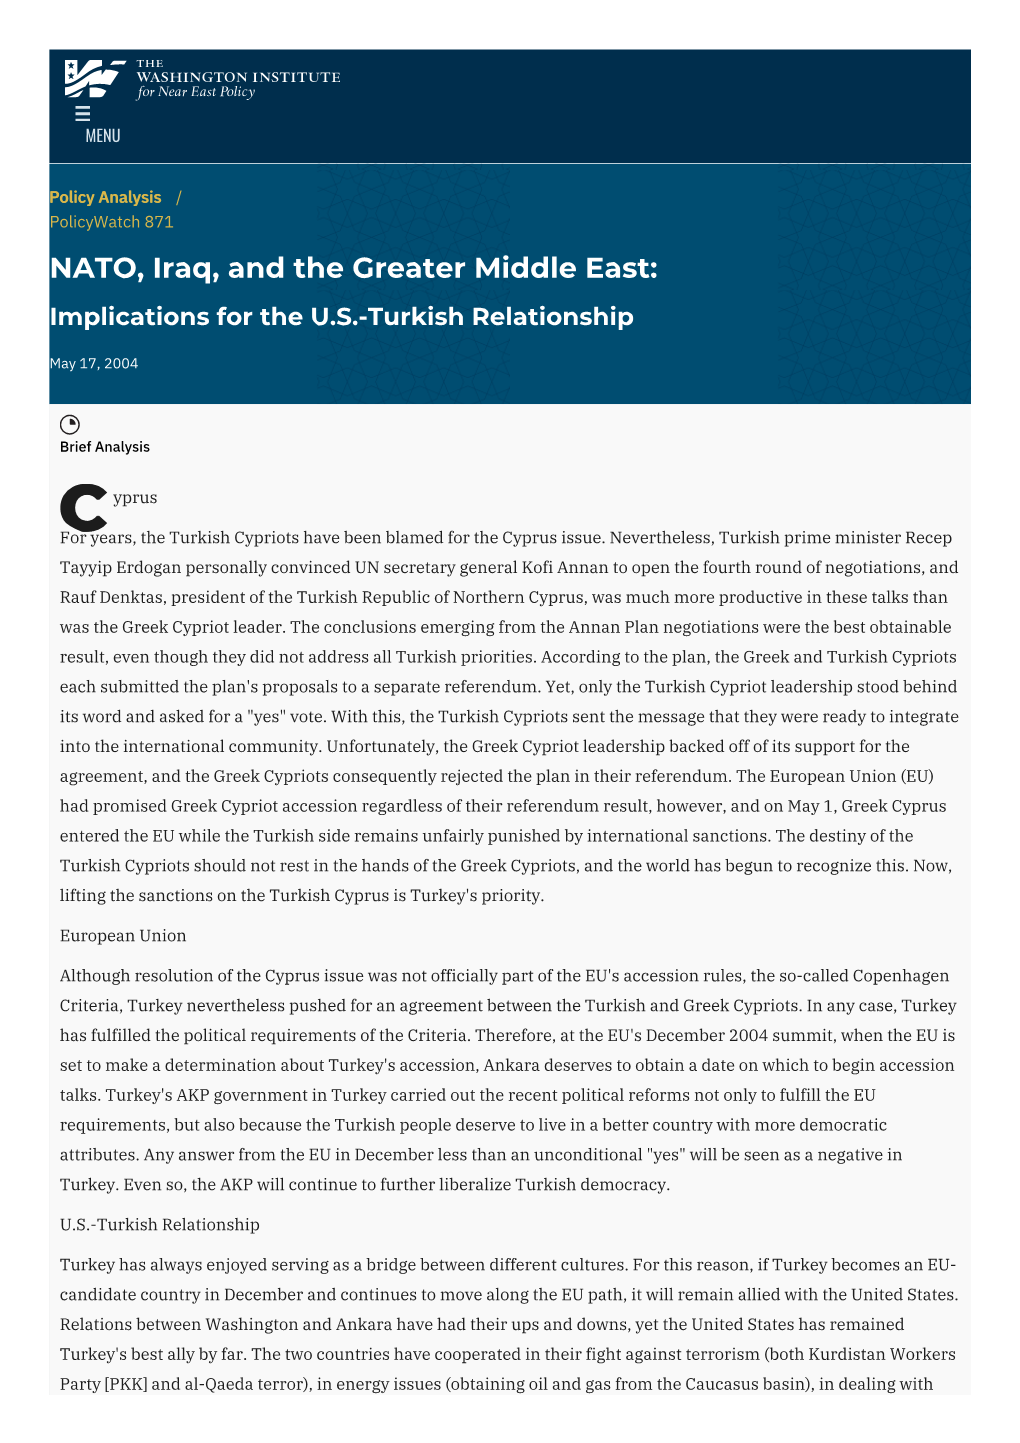 NATO, Iraq, and the Greater Middle East: Implications for the U.S.-Turkish Relationship